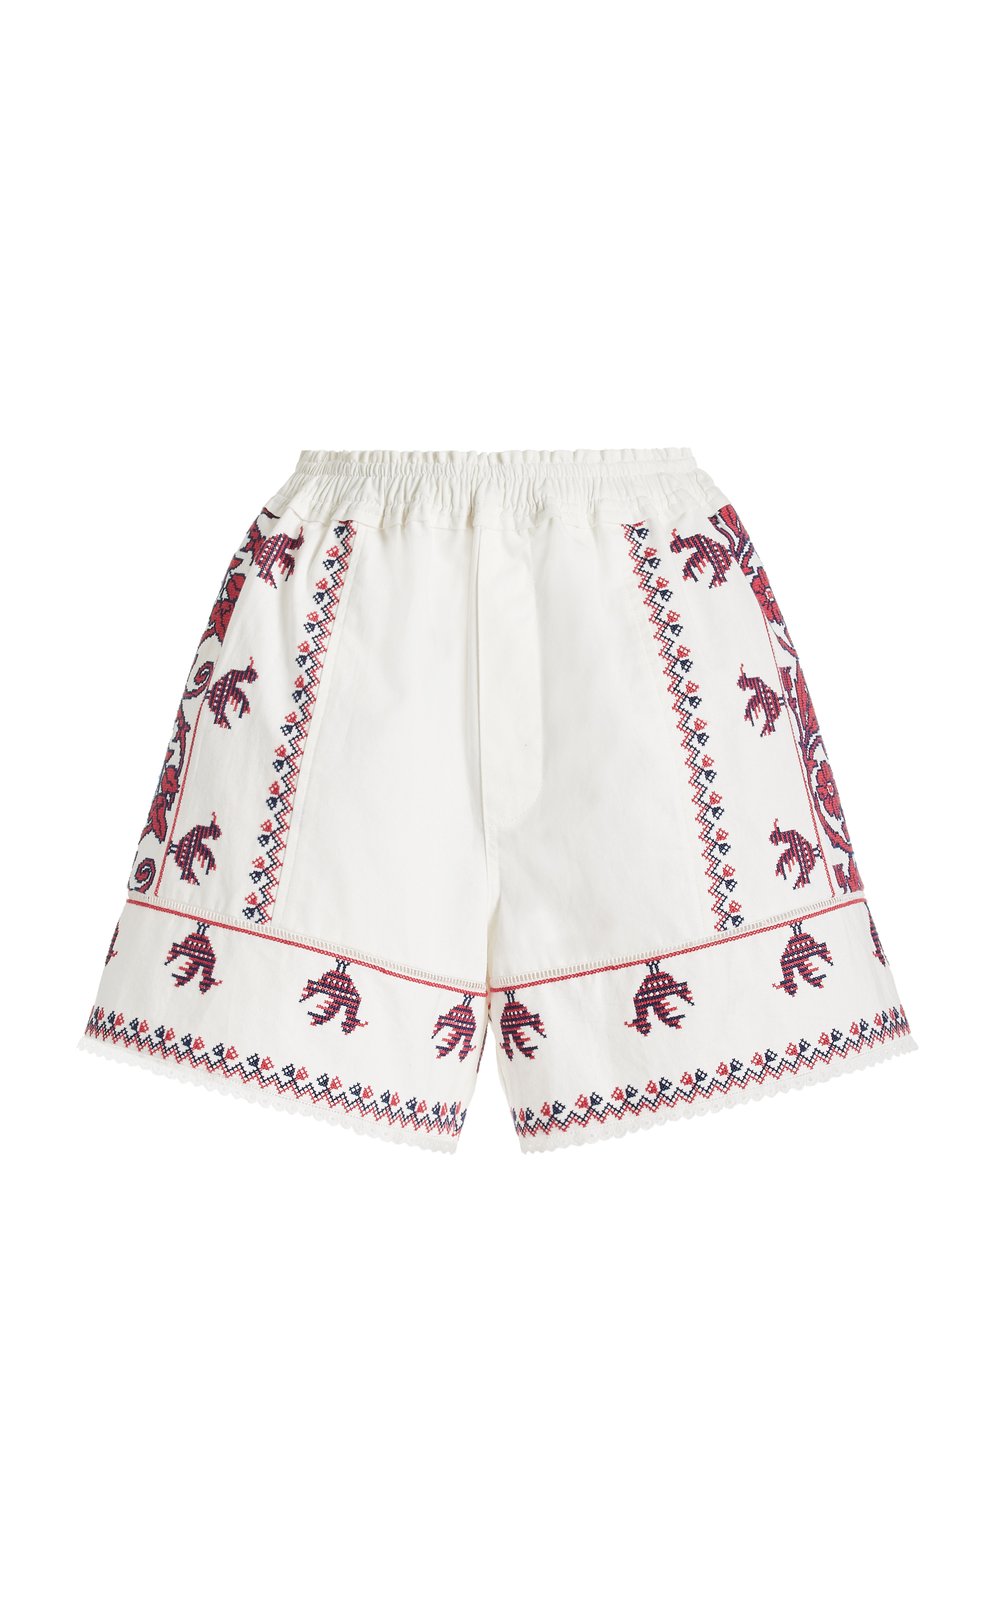 sea-white-beena-embroidery-shorts-d2.jpg